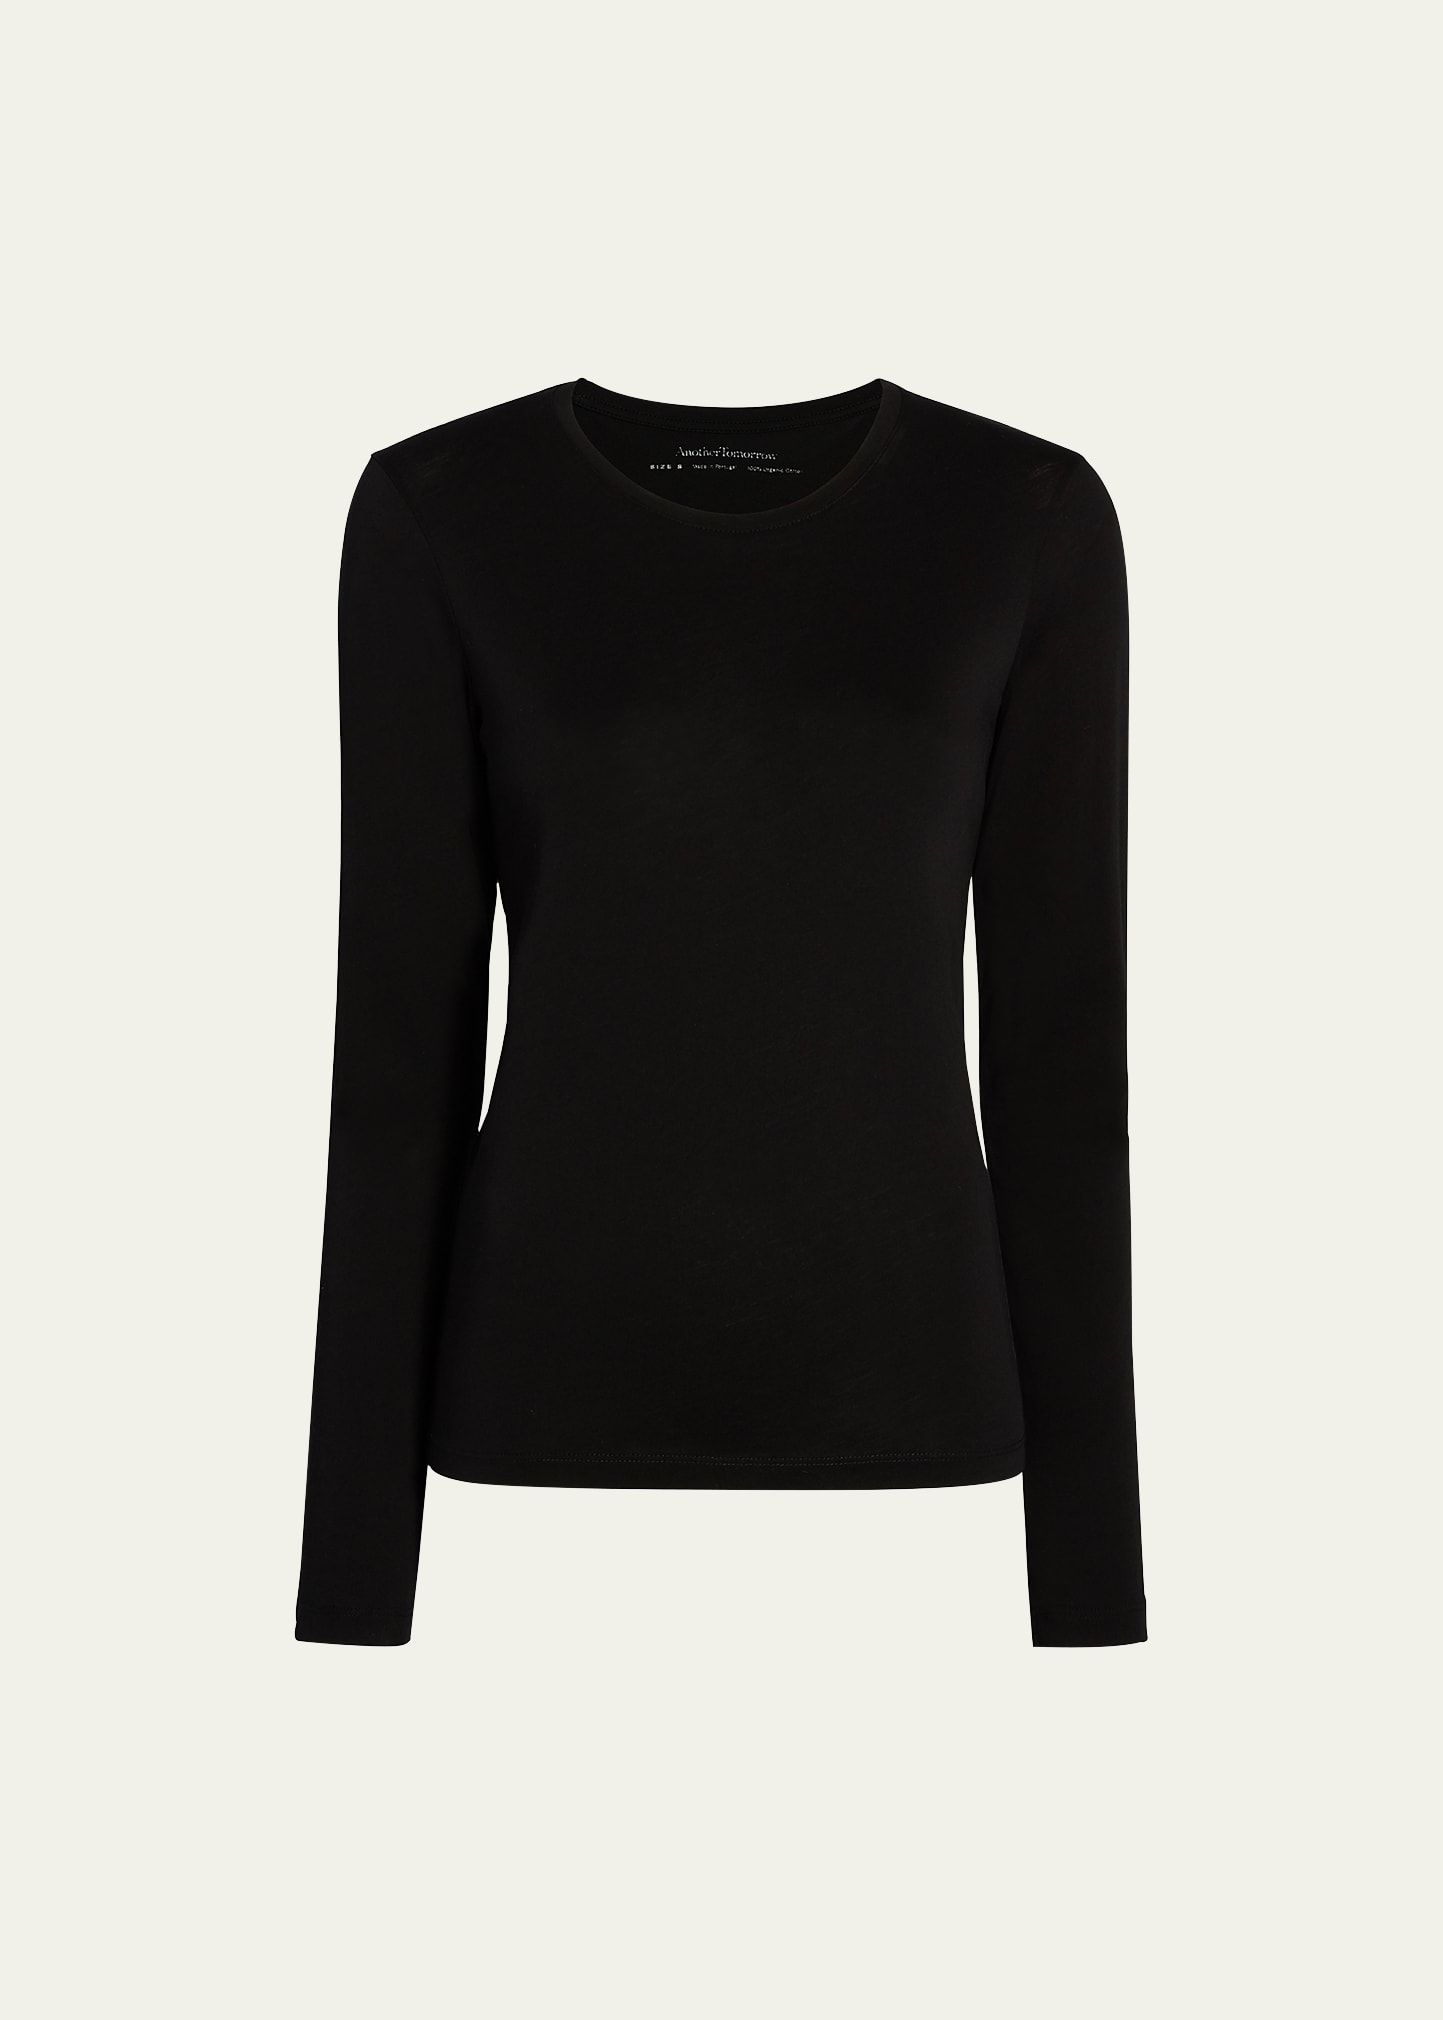 Another Tomorrow Cotton Long Sleeve Tee In Black